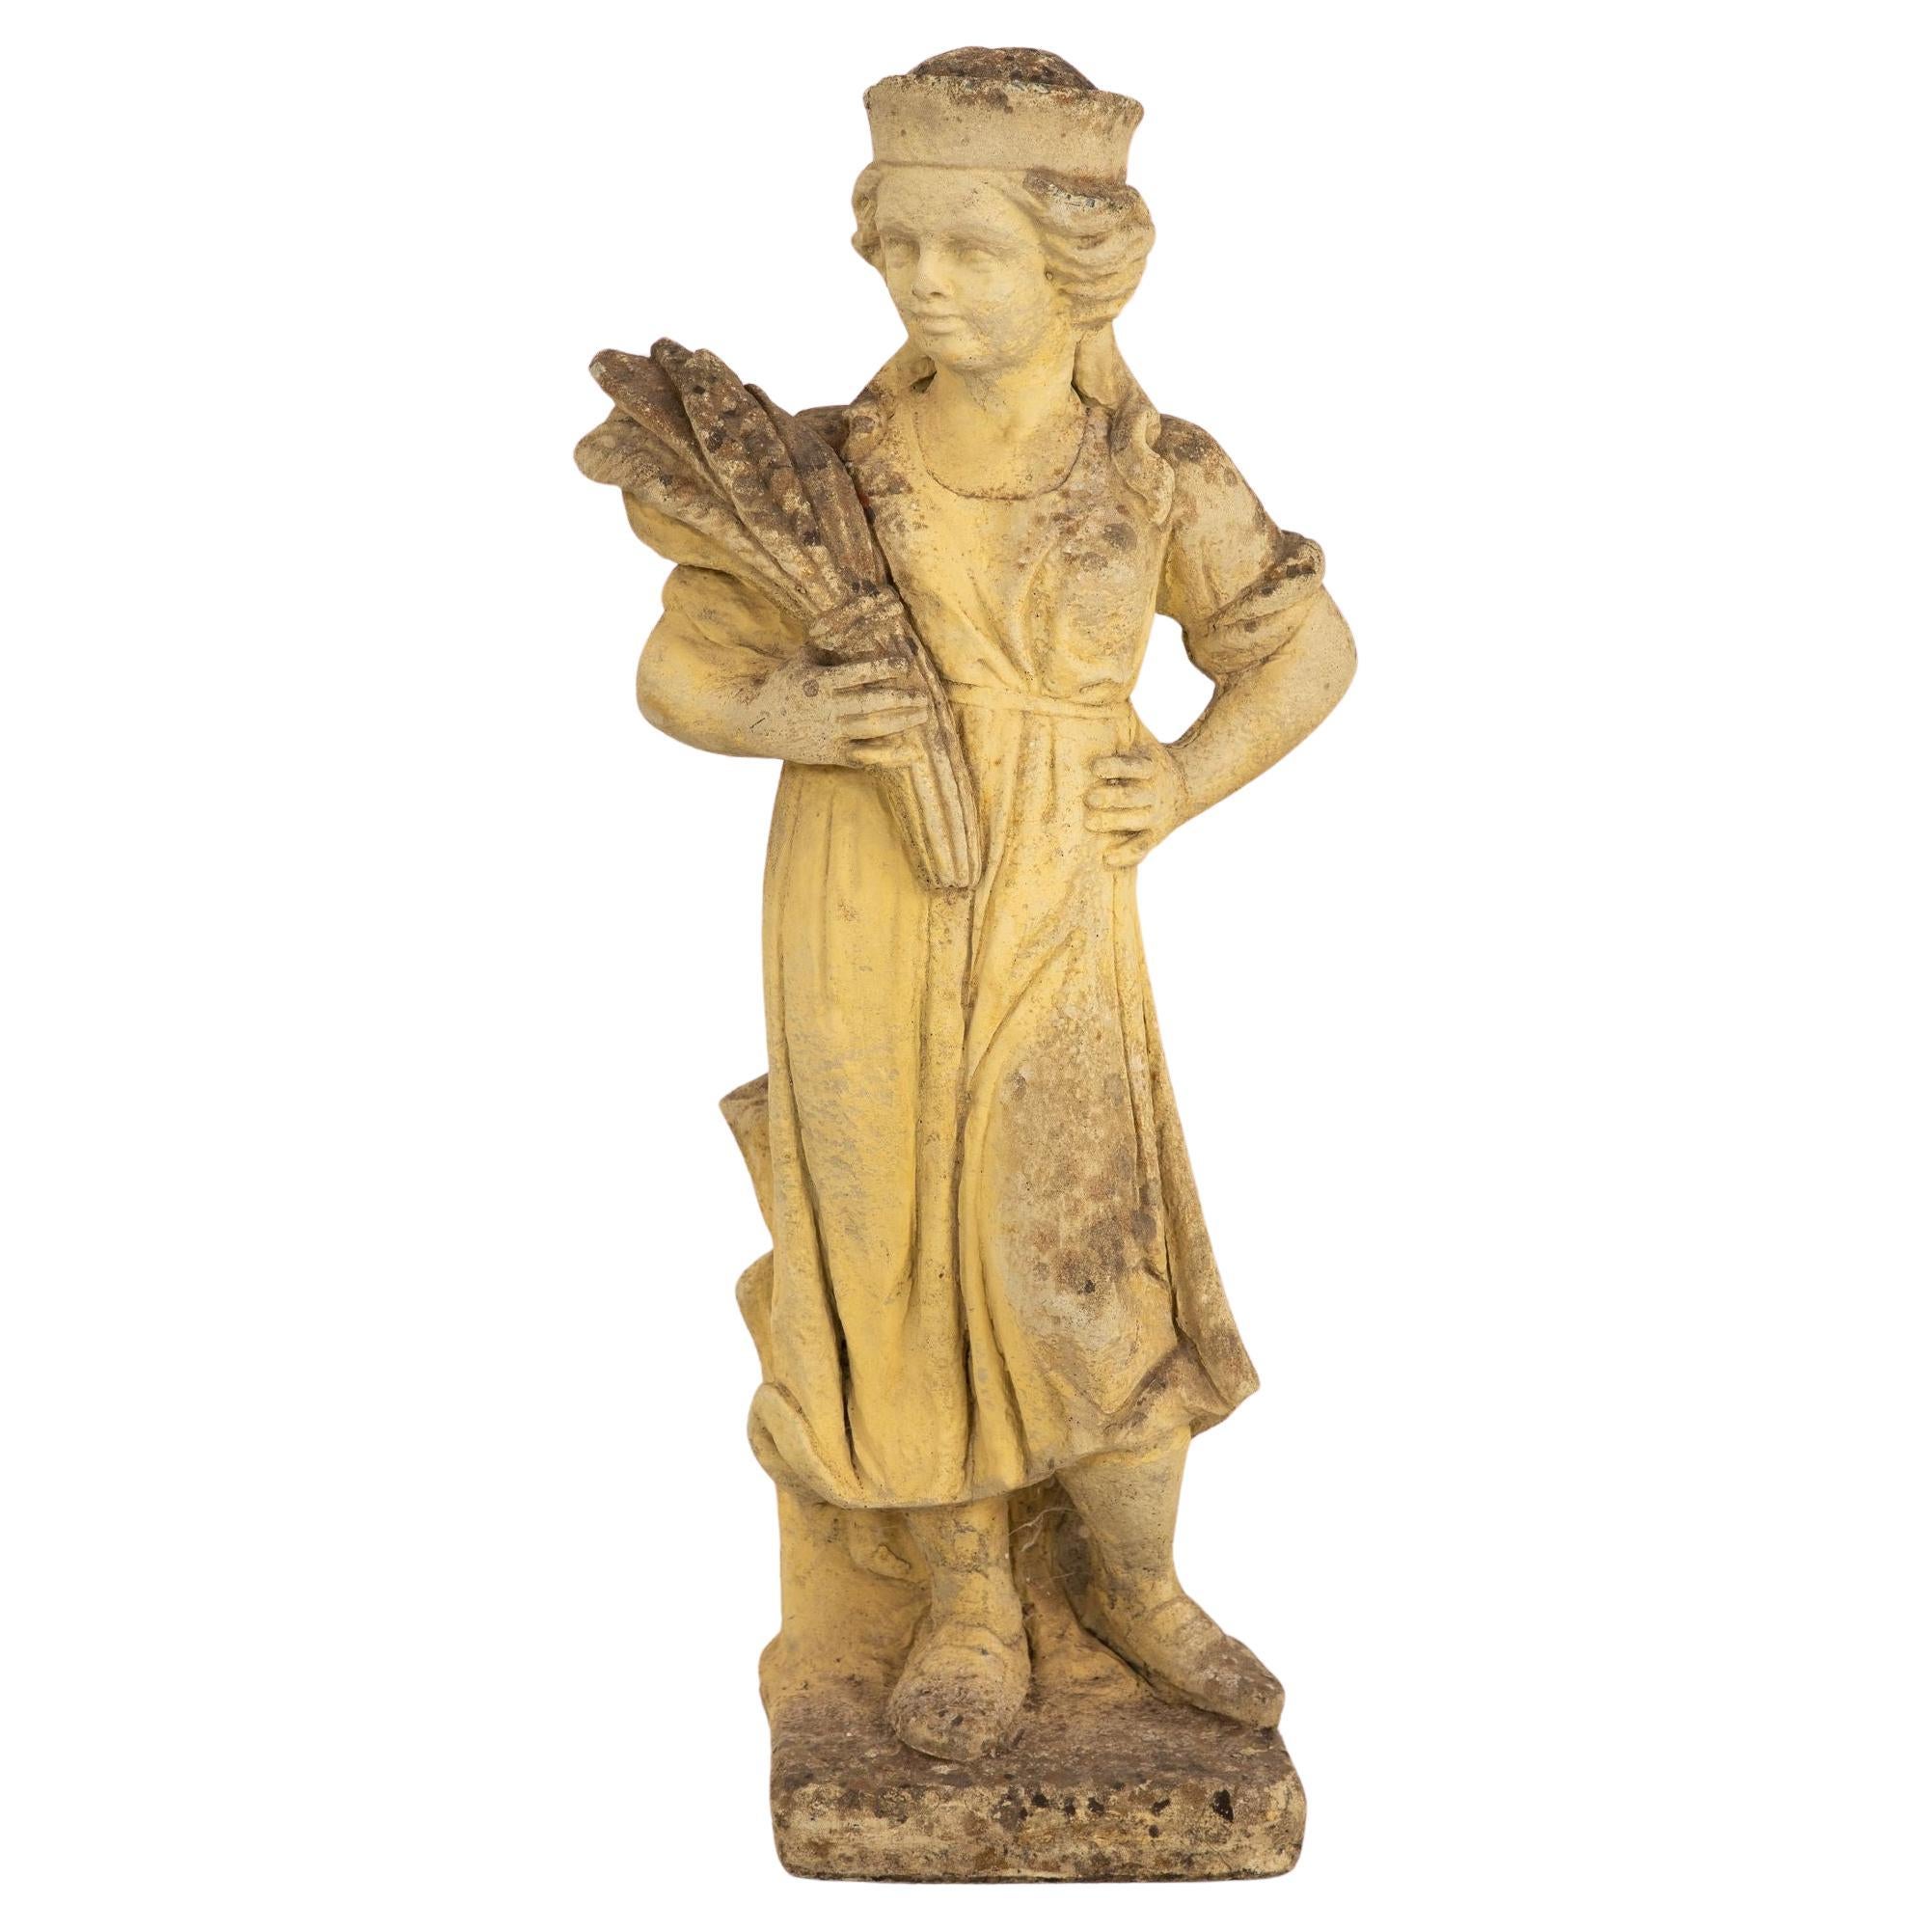 Woman Holding Sheaf of Wheat, Concrete Garden Ornament, England Mid 20th Century